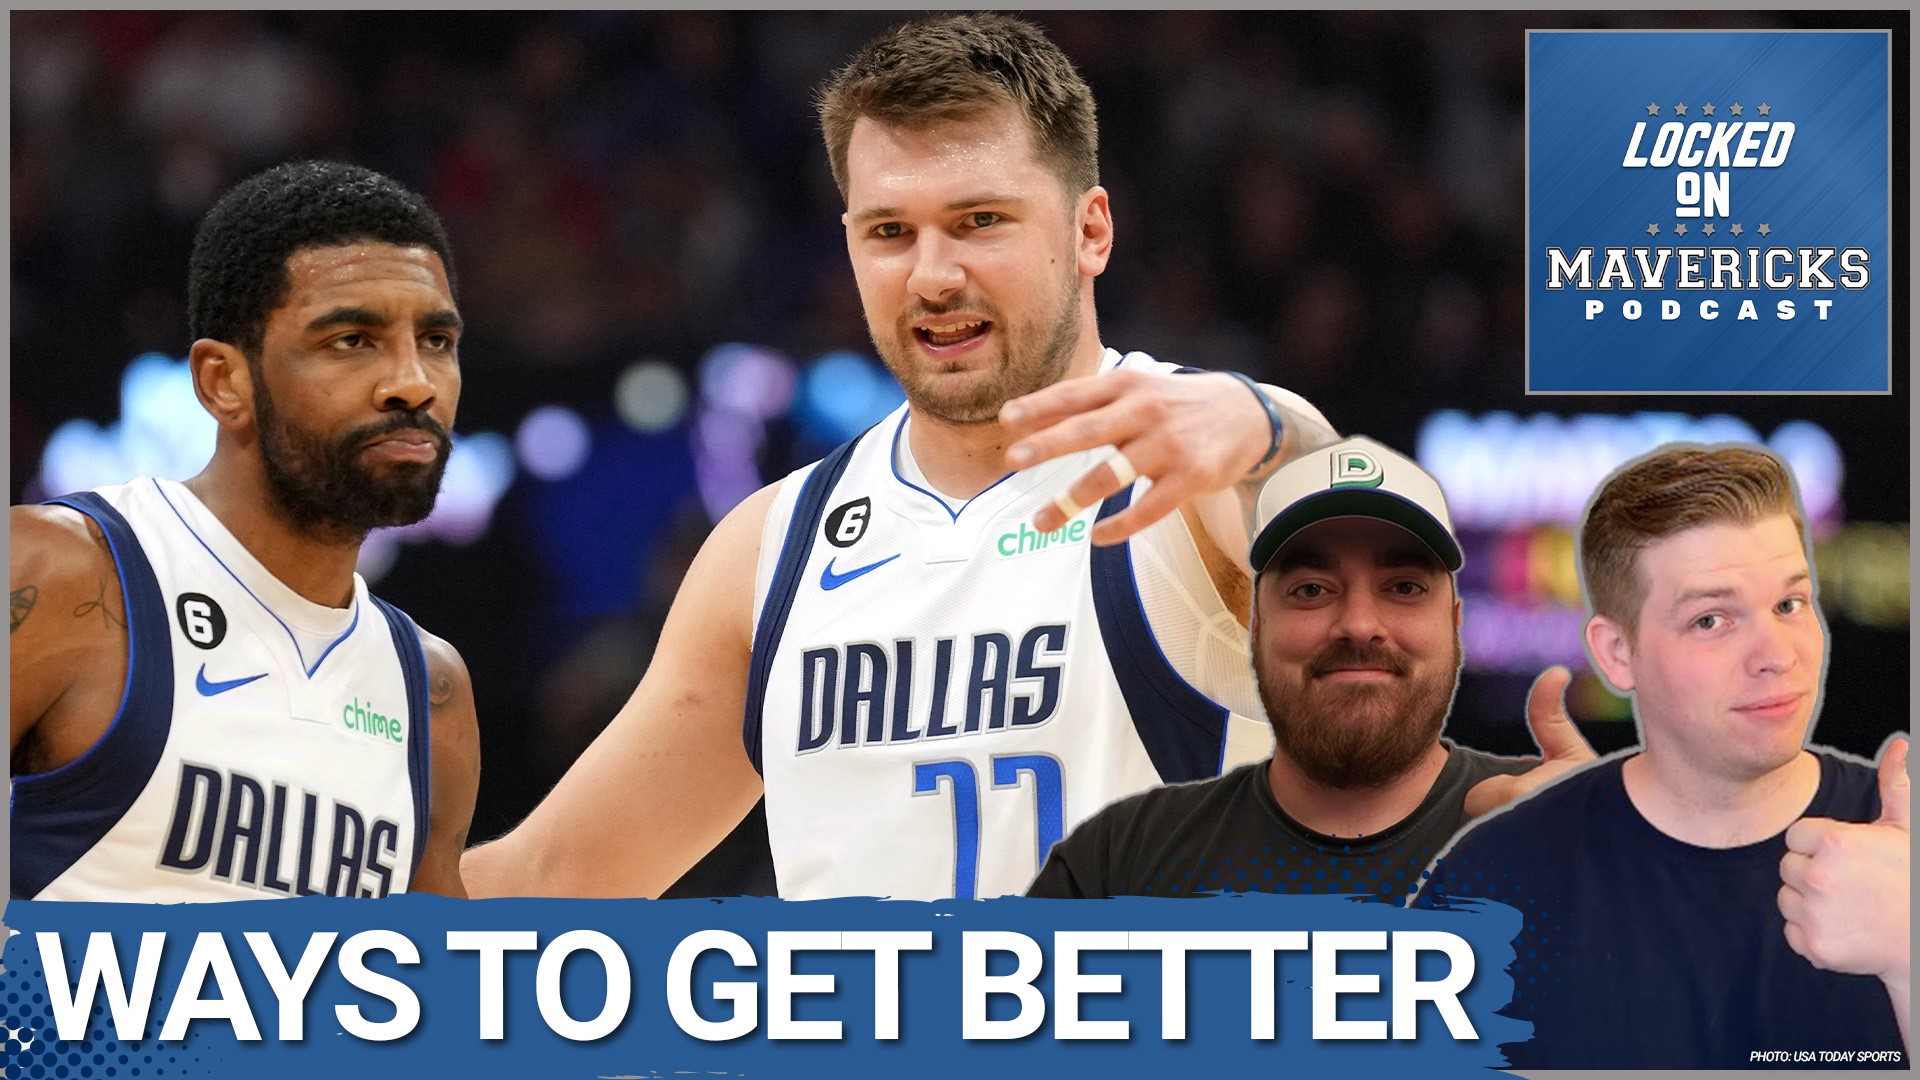 Nick Angstadt & Isaac Harris share ways the Dallas Mavericks can get better on defense next season to improve around Luka Doncic & Kyrie Irving.